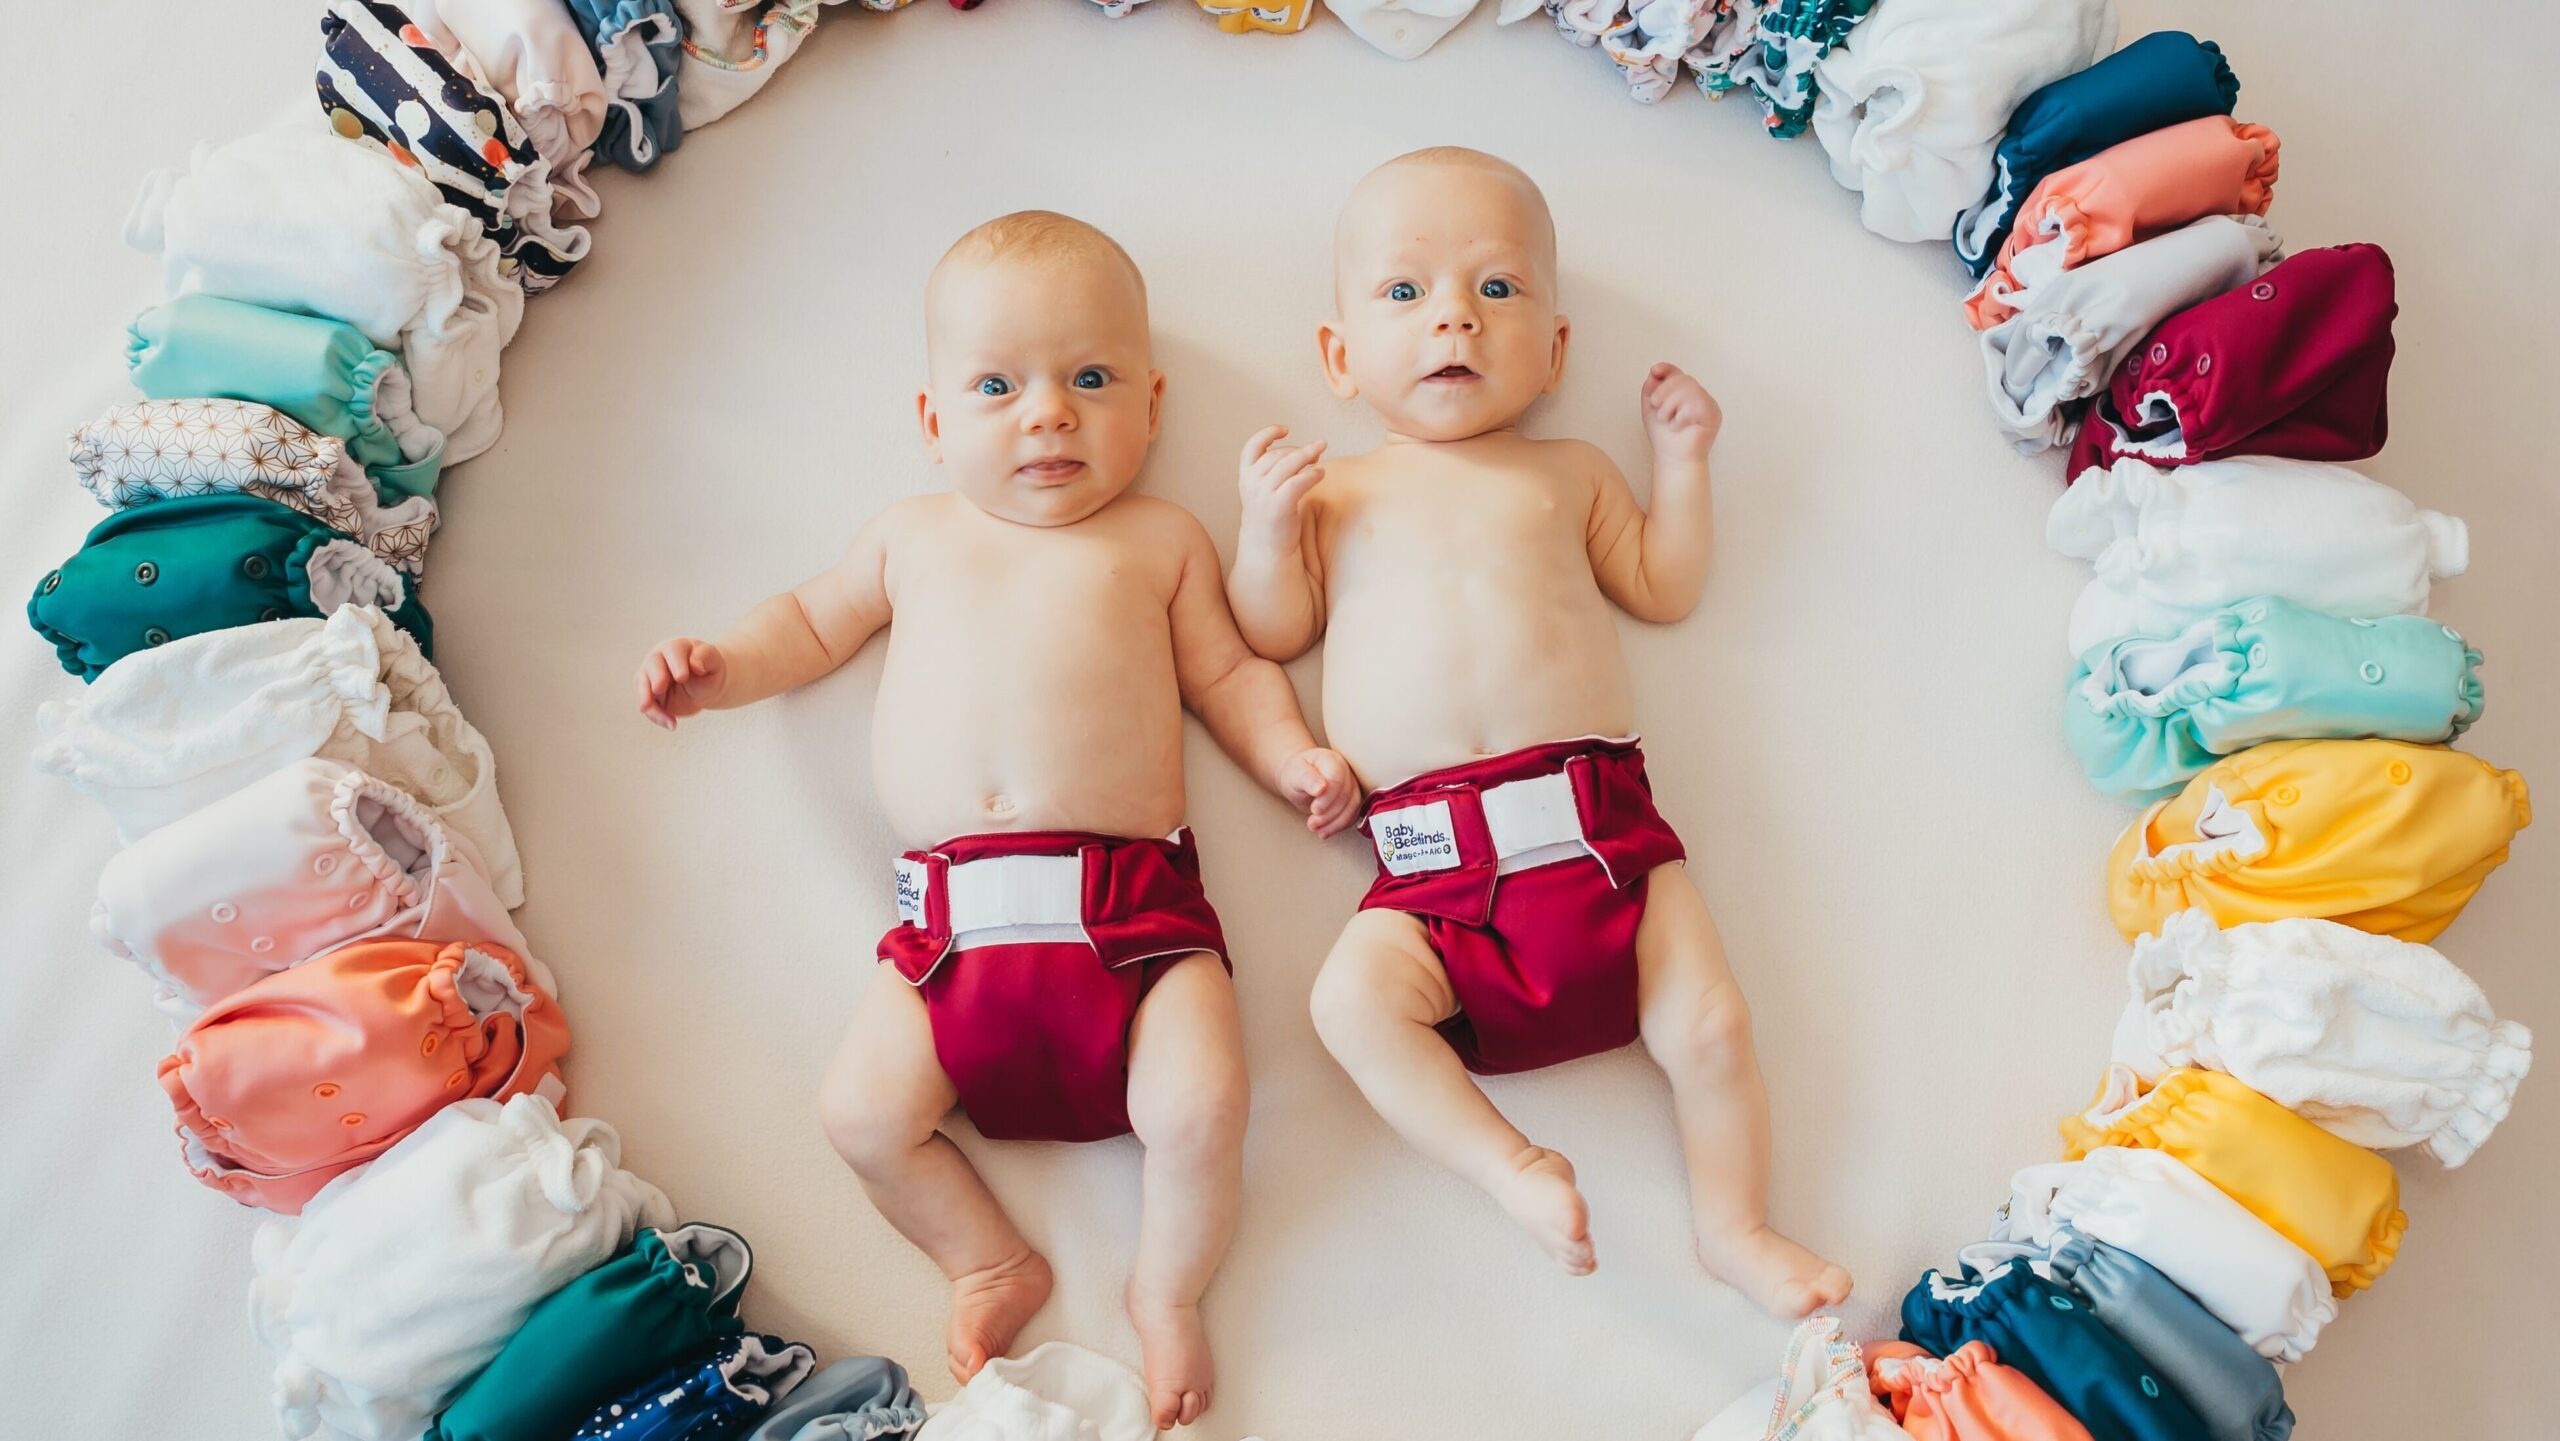 Two babies in reusable nappies.